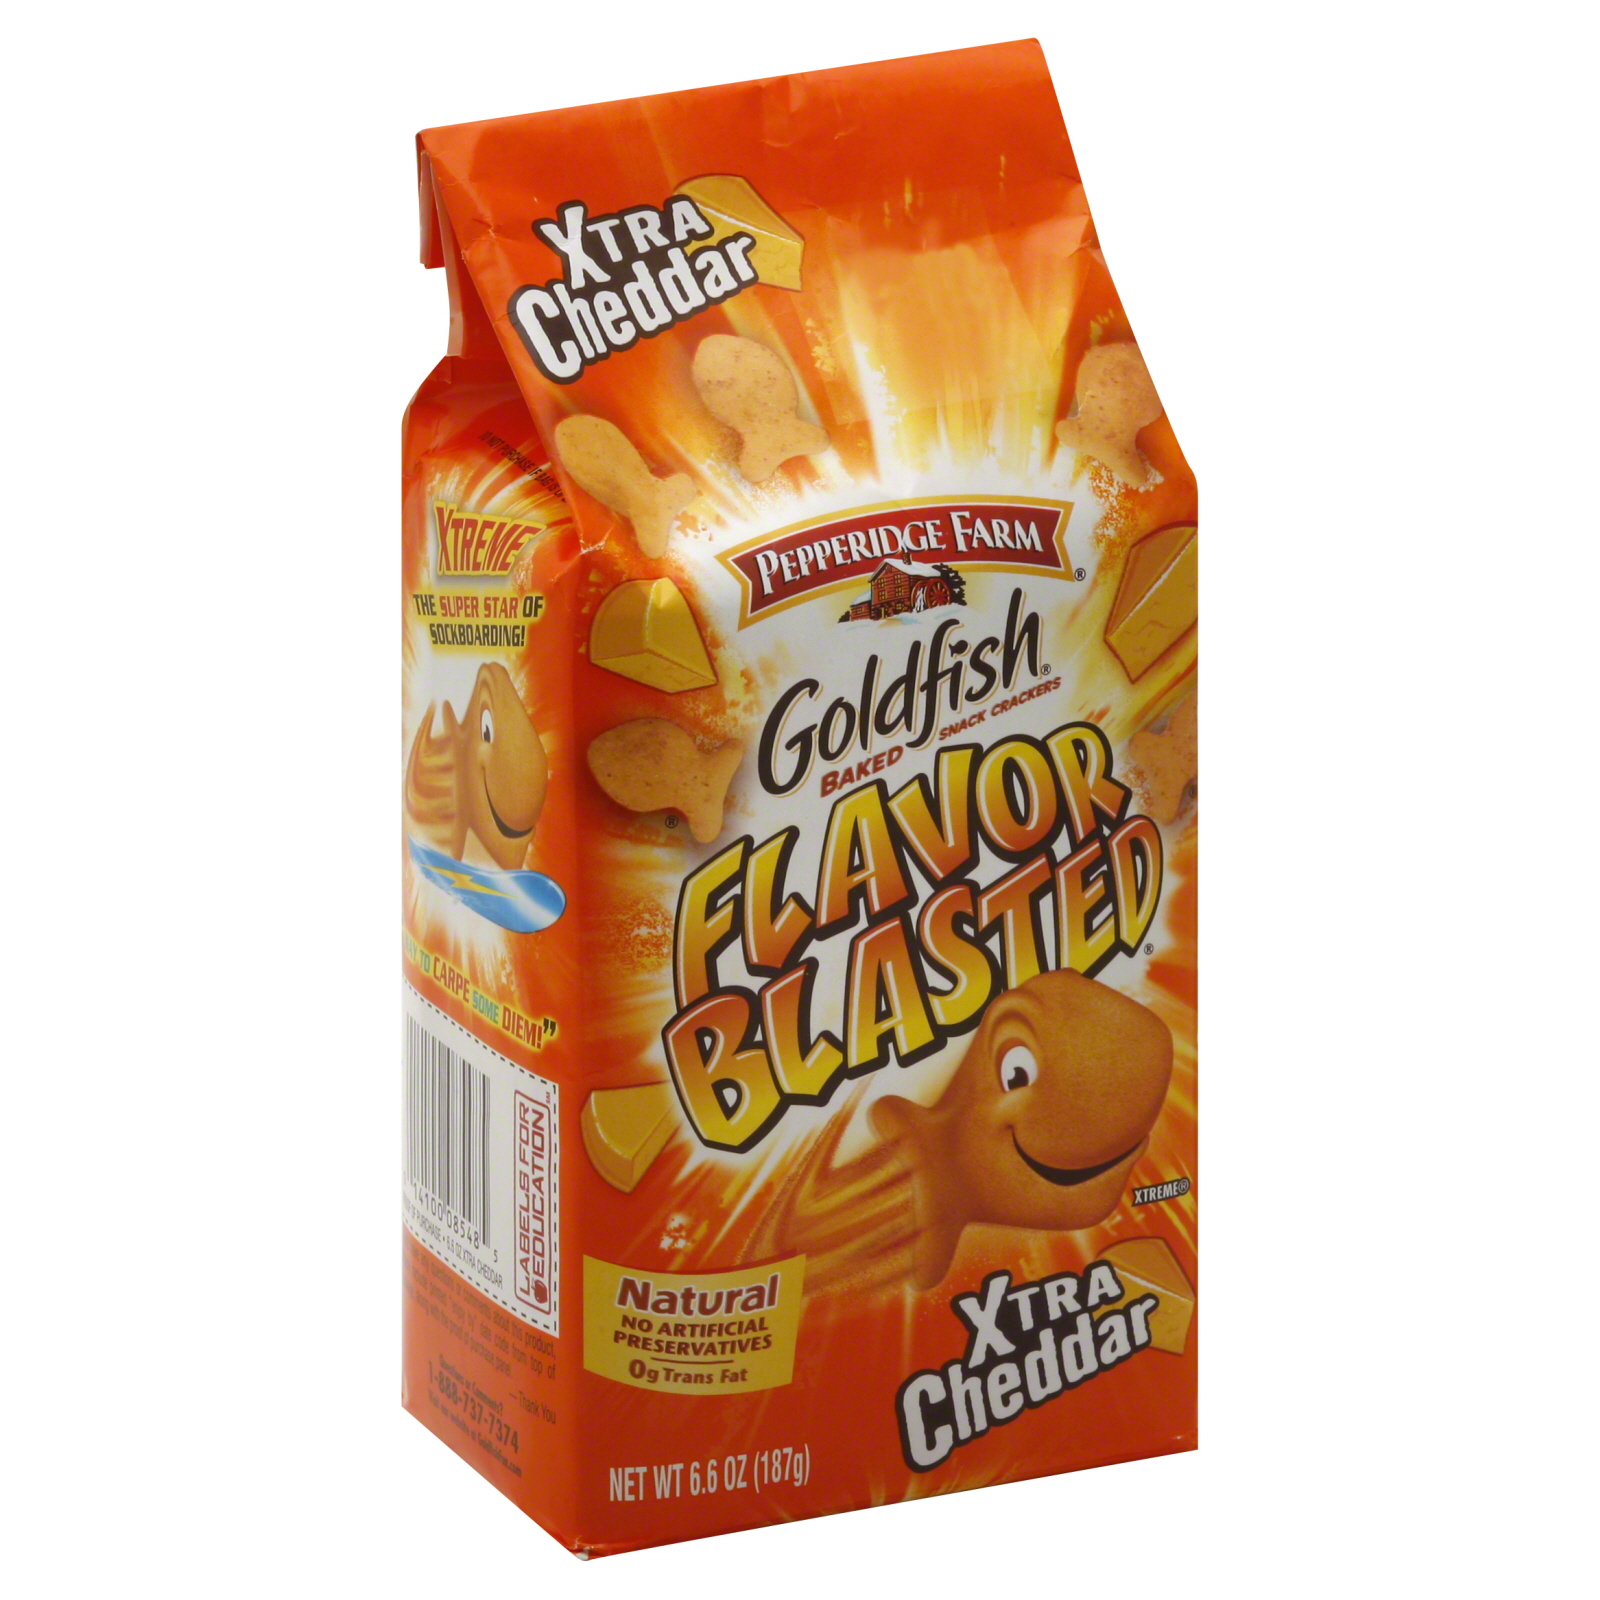 Farm Flavor Blasted Goldfish Baked Snack Crackers Xtra Cheddar